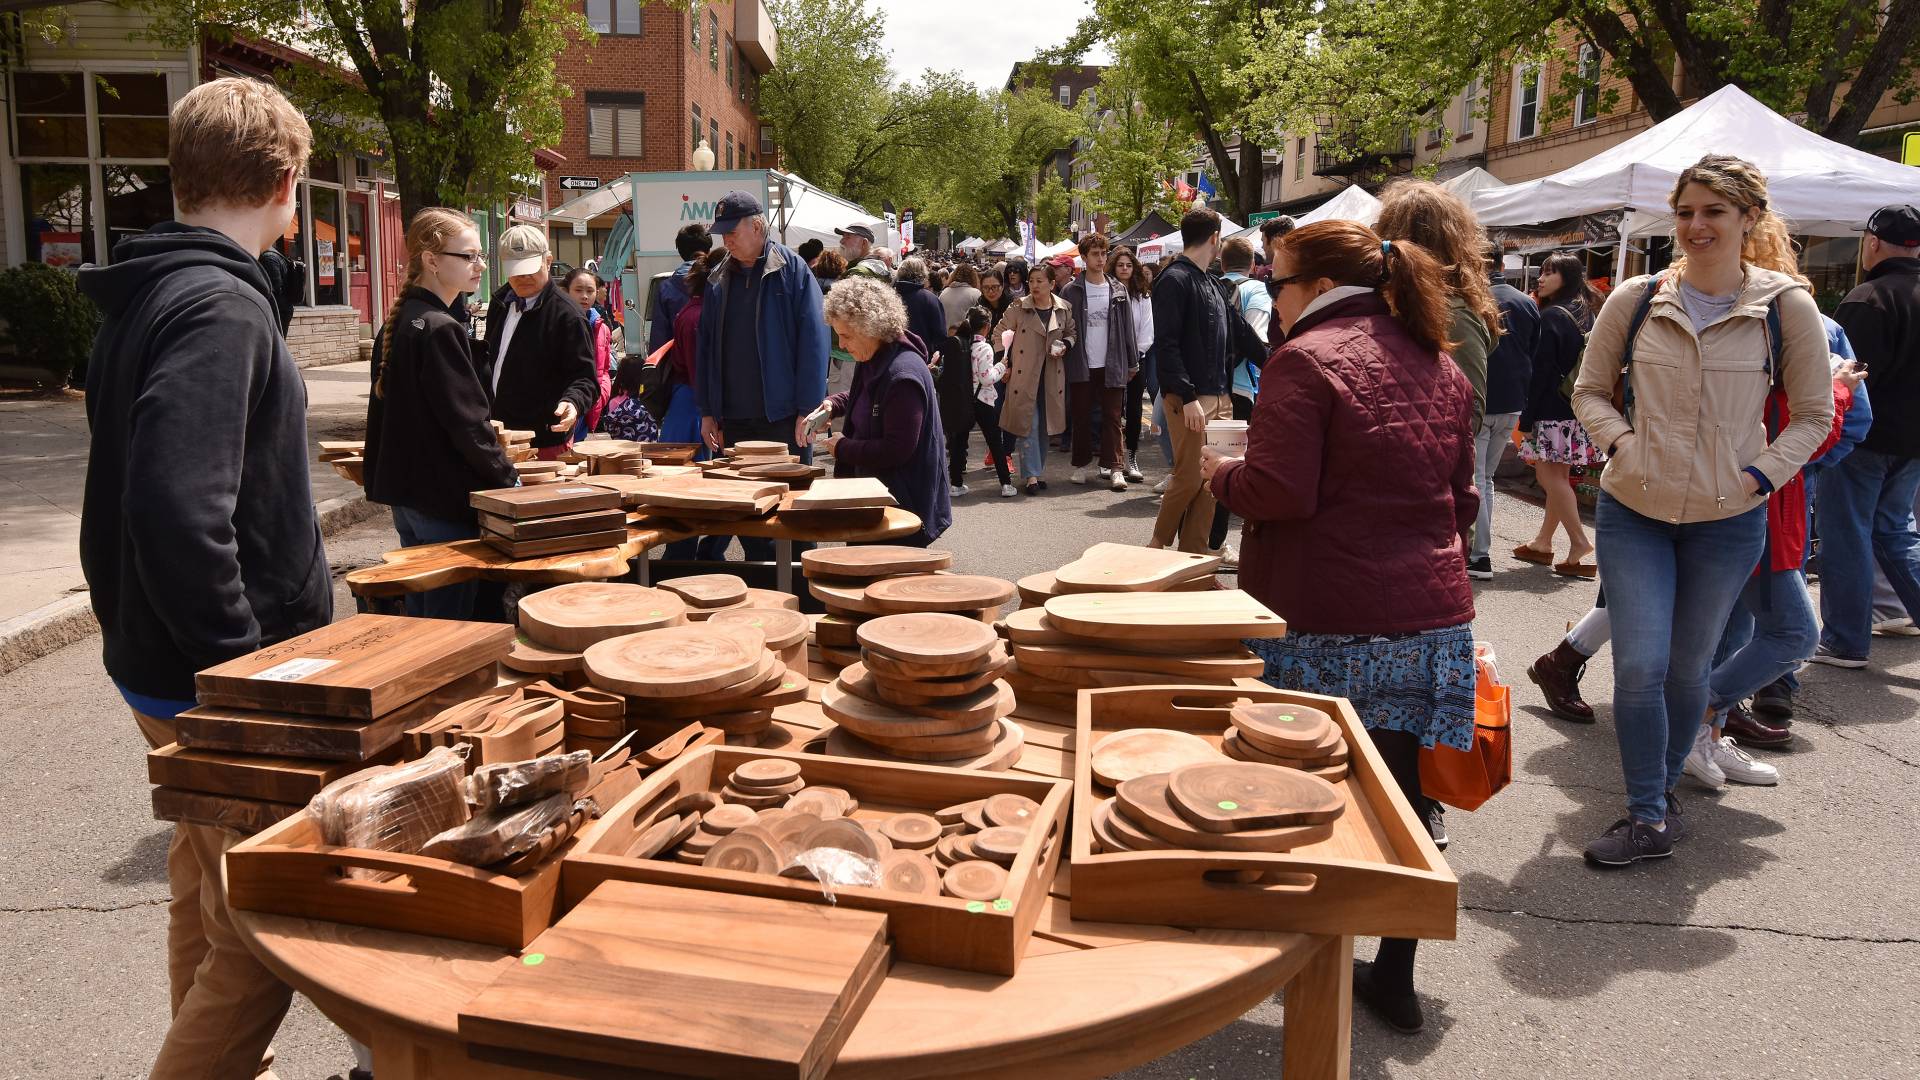 Wood crafts at a table while people walk 